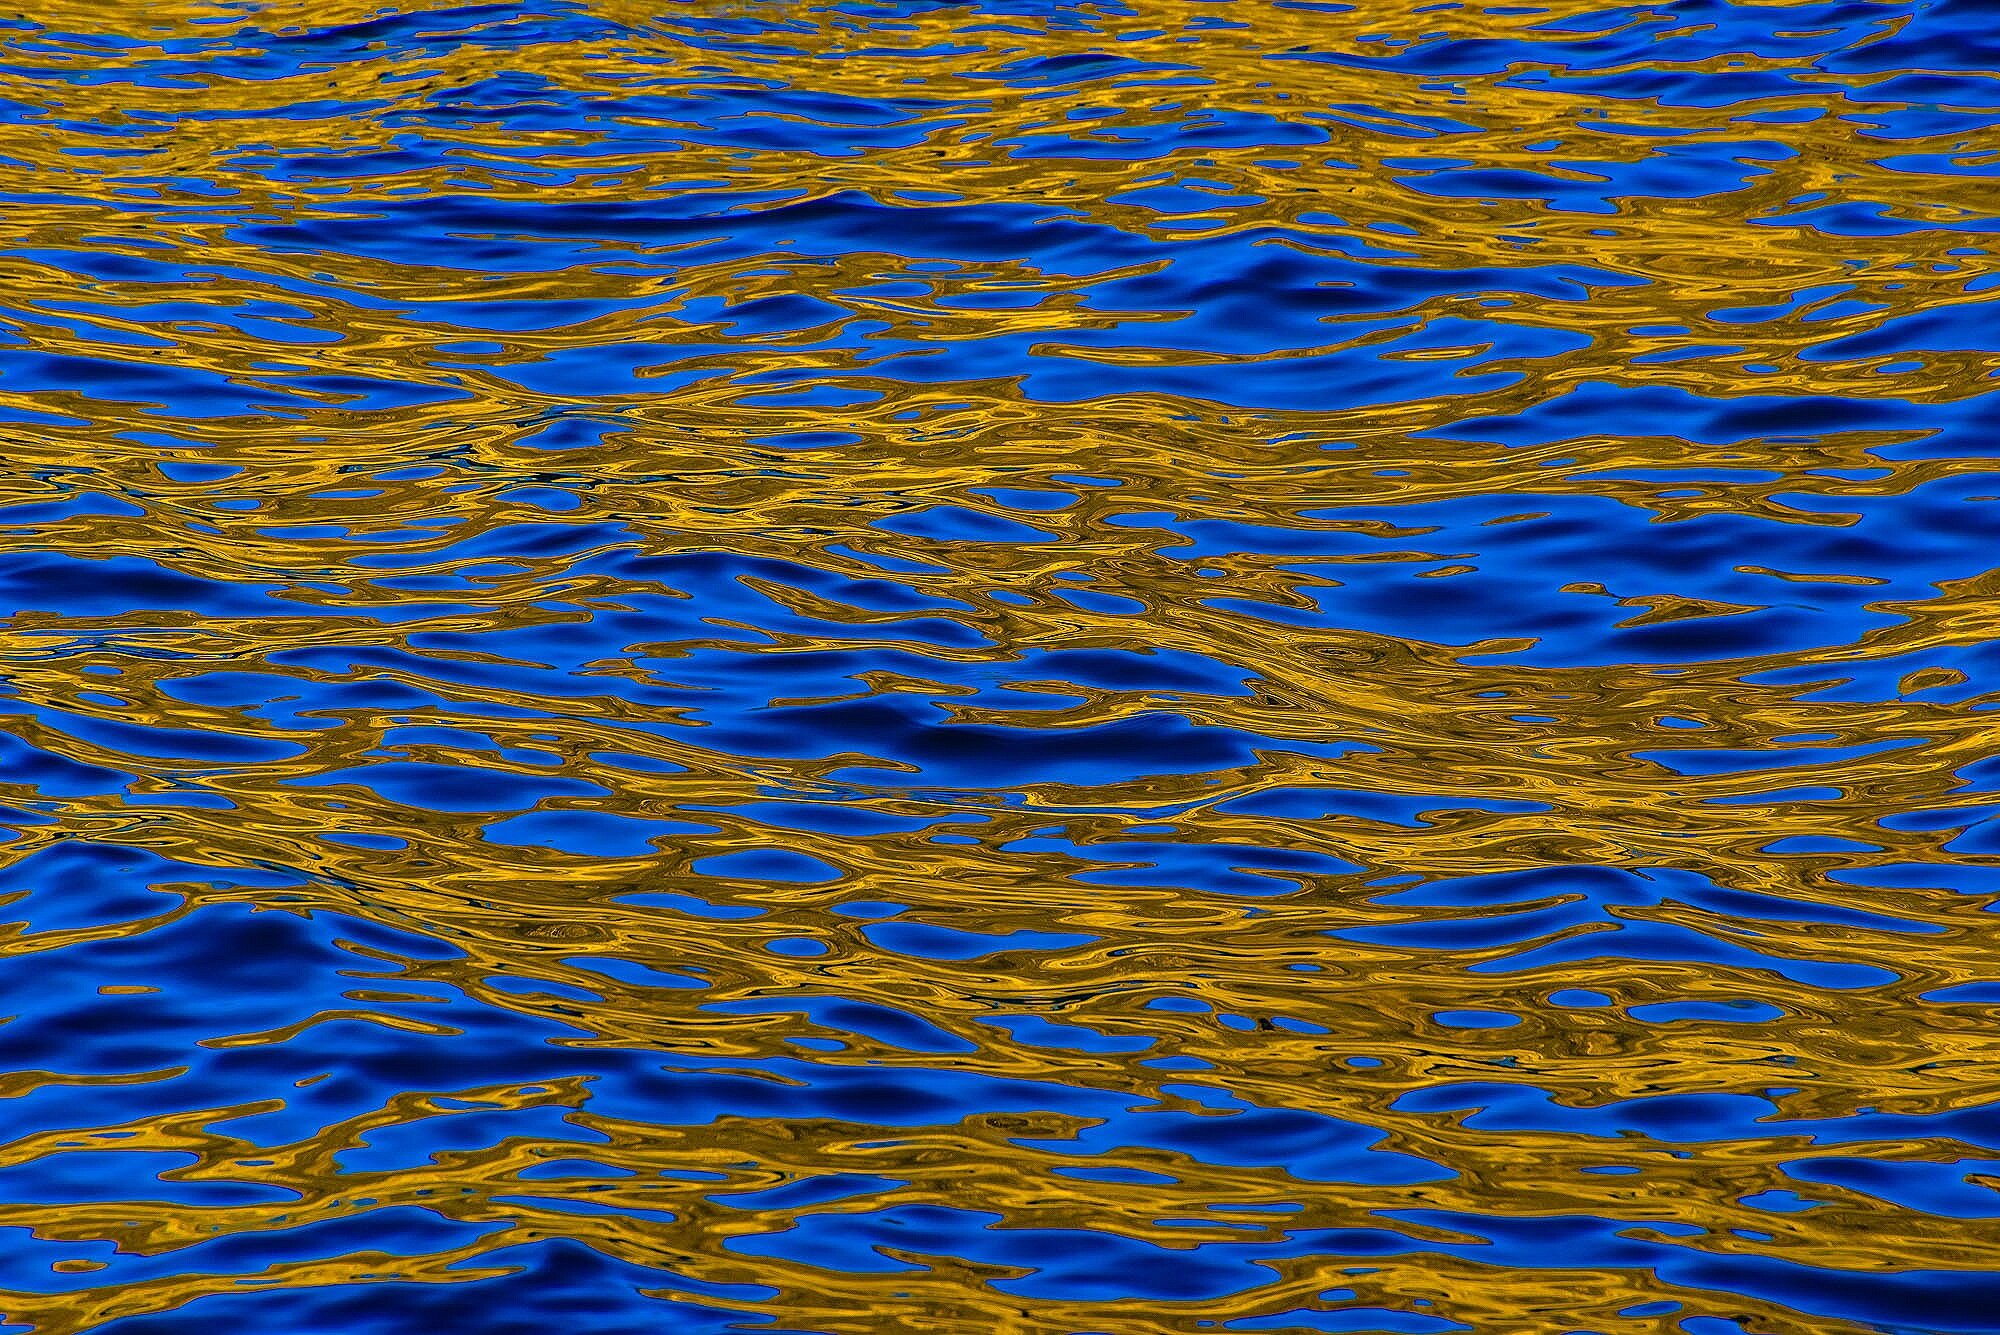 Blue and Gold Reflections